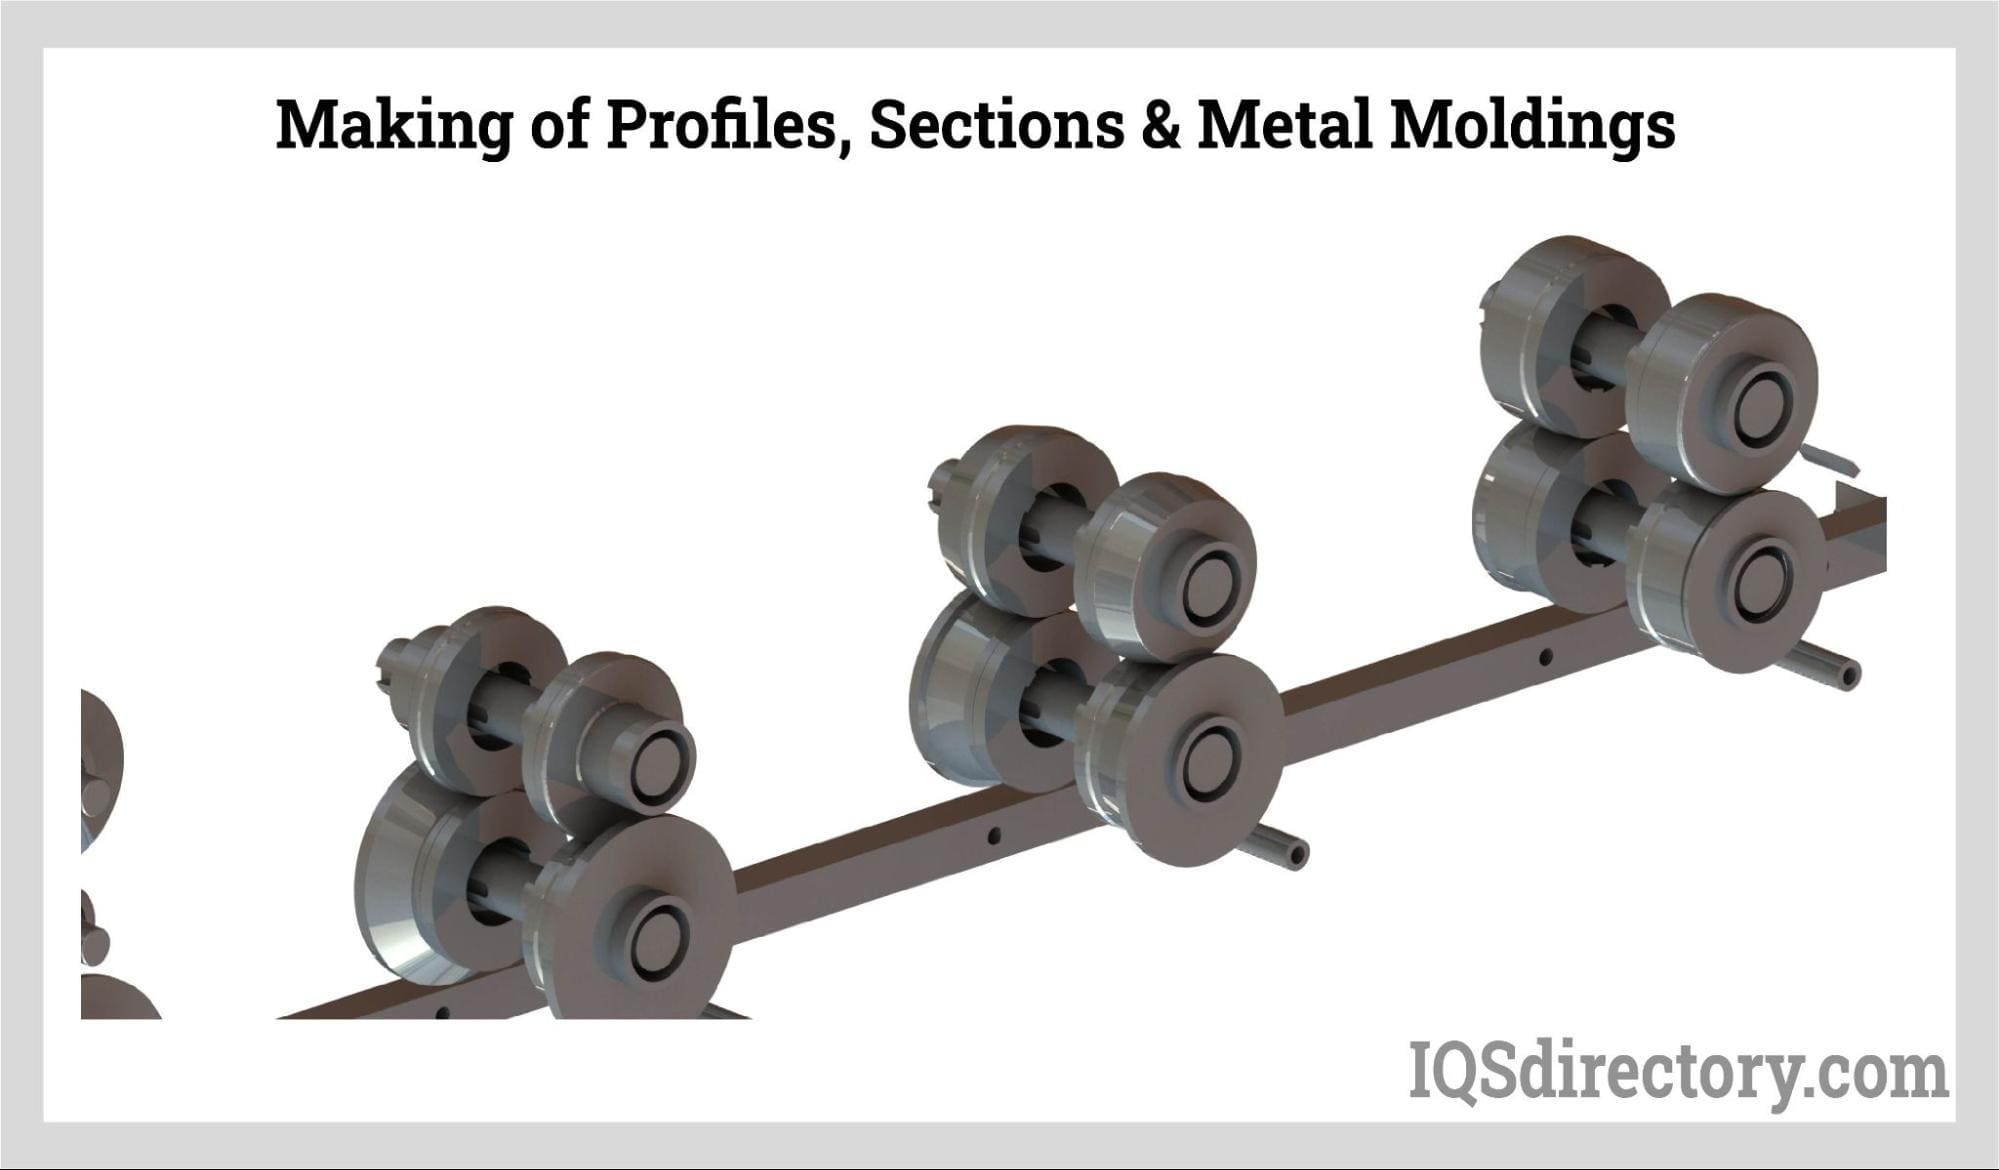 Making of Profiles, Sections & Metal Moldings